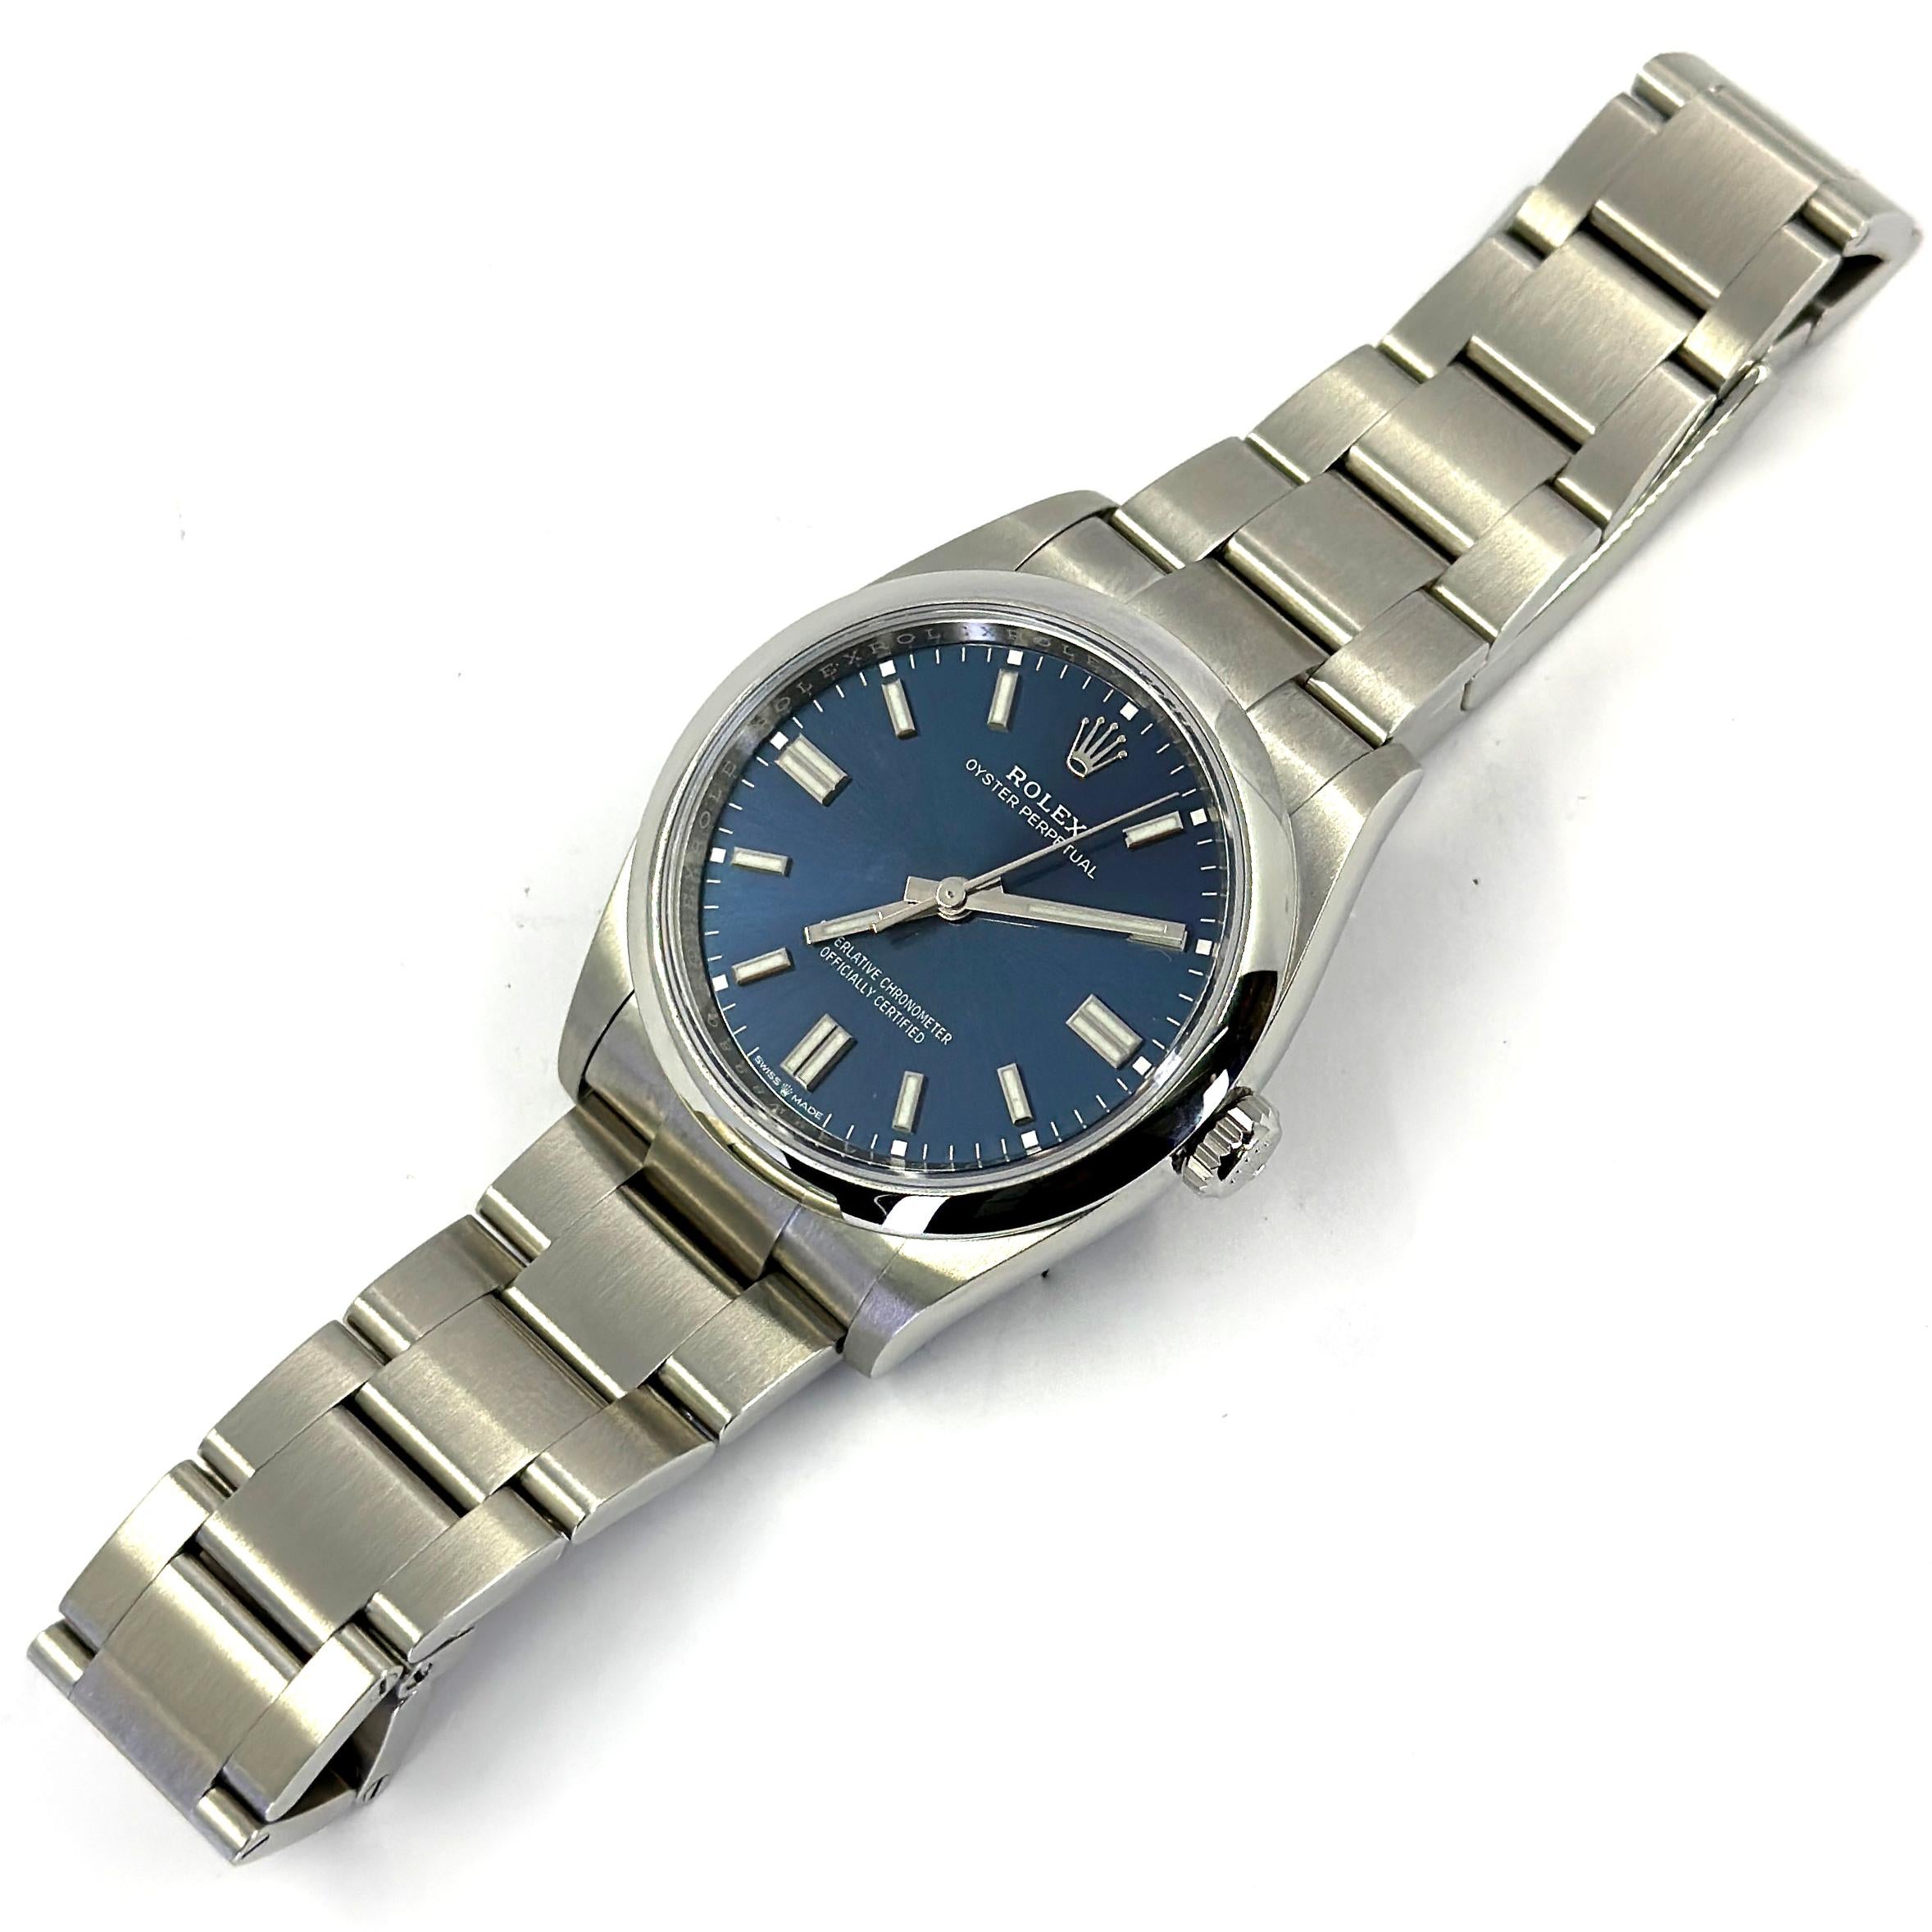 Rolex Oyster Perpetual Blue Dial 36mm comme neuf en vente 3